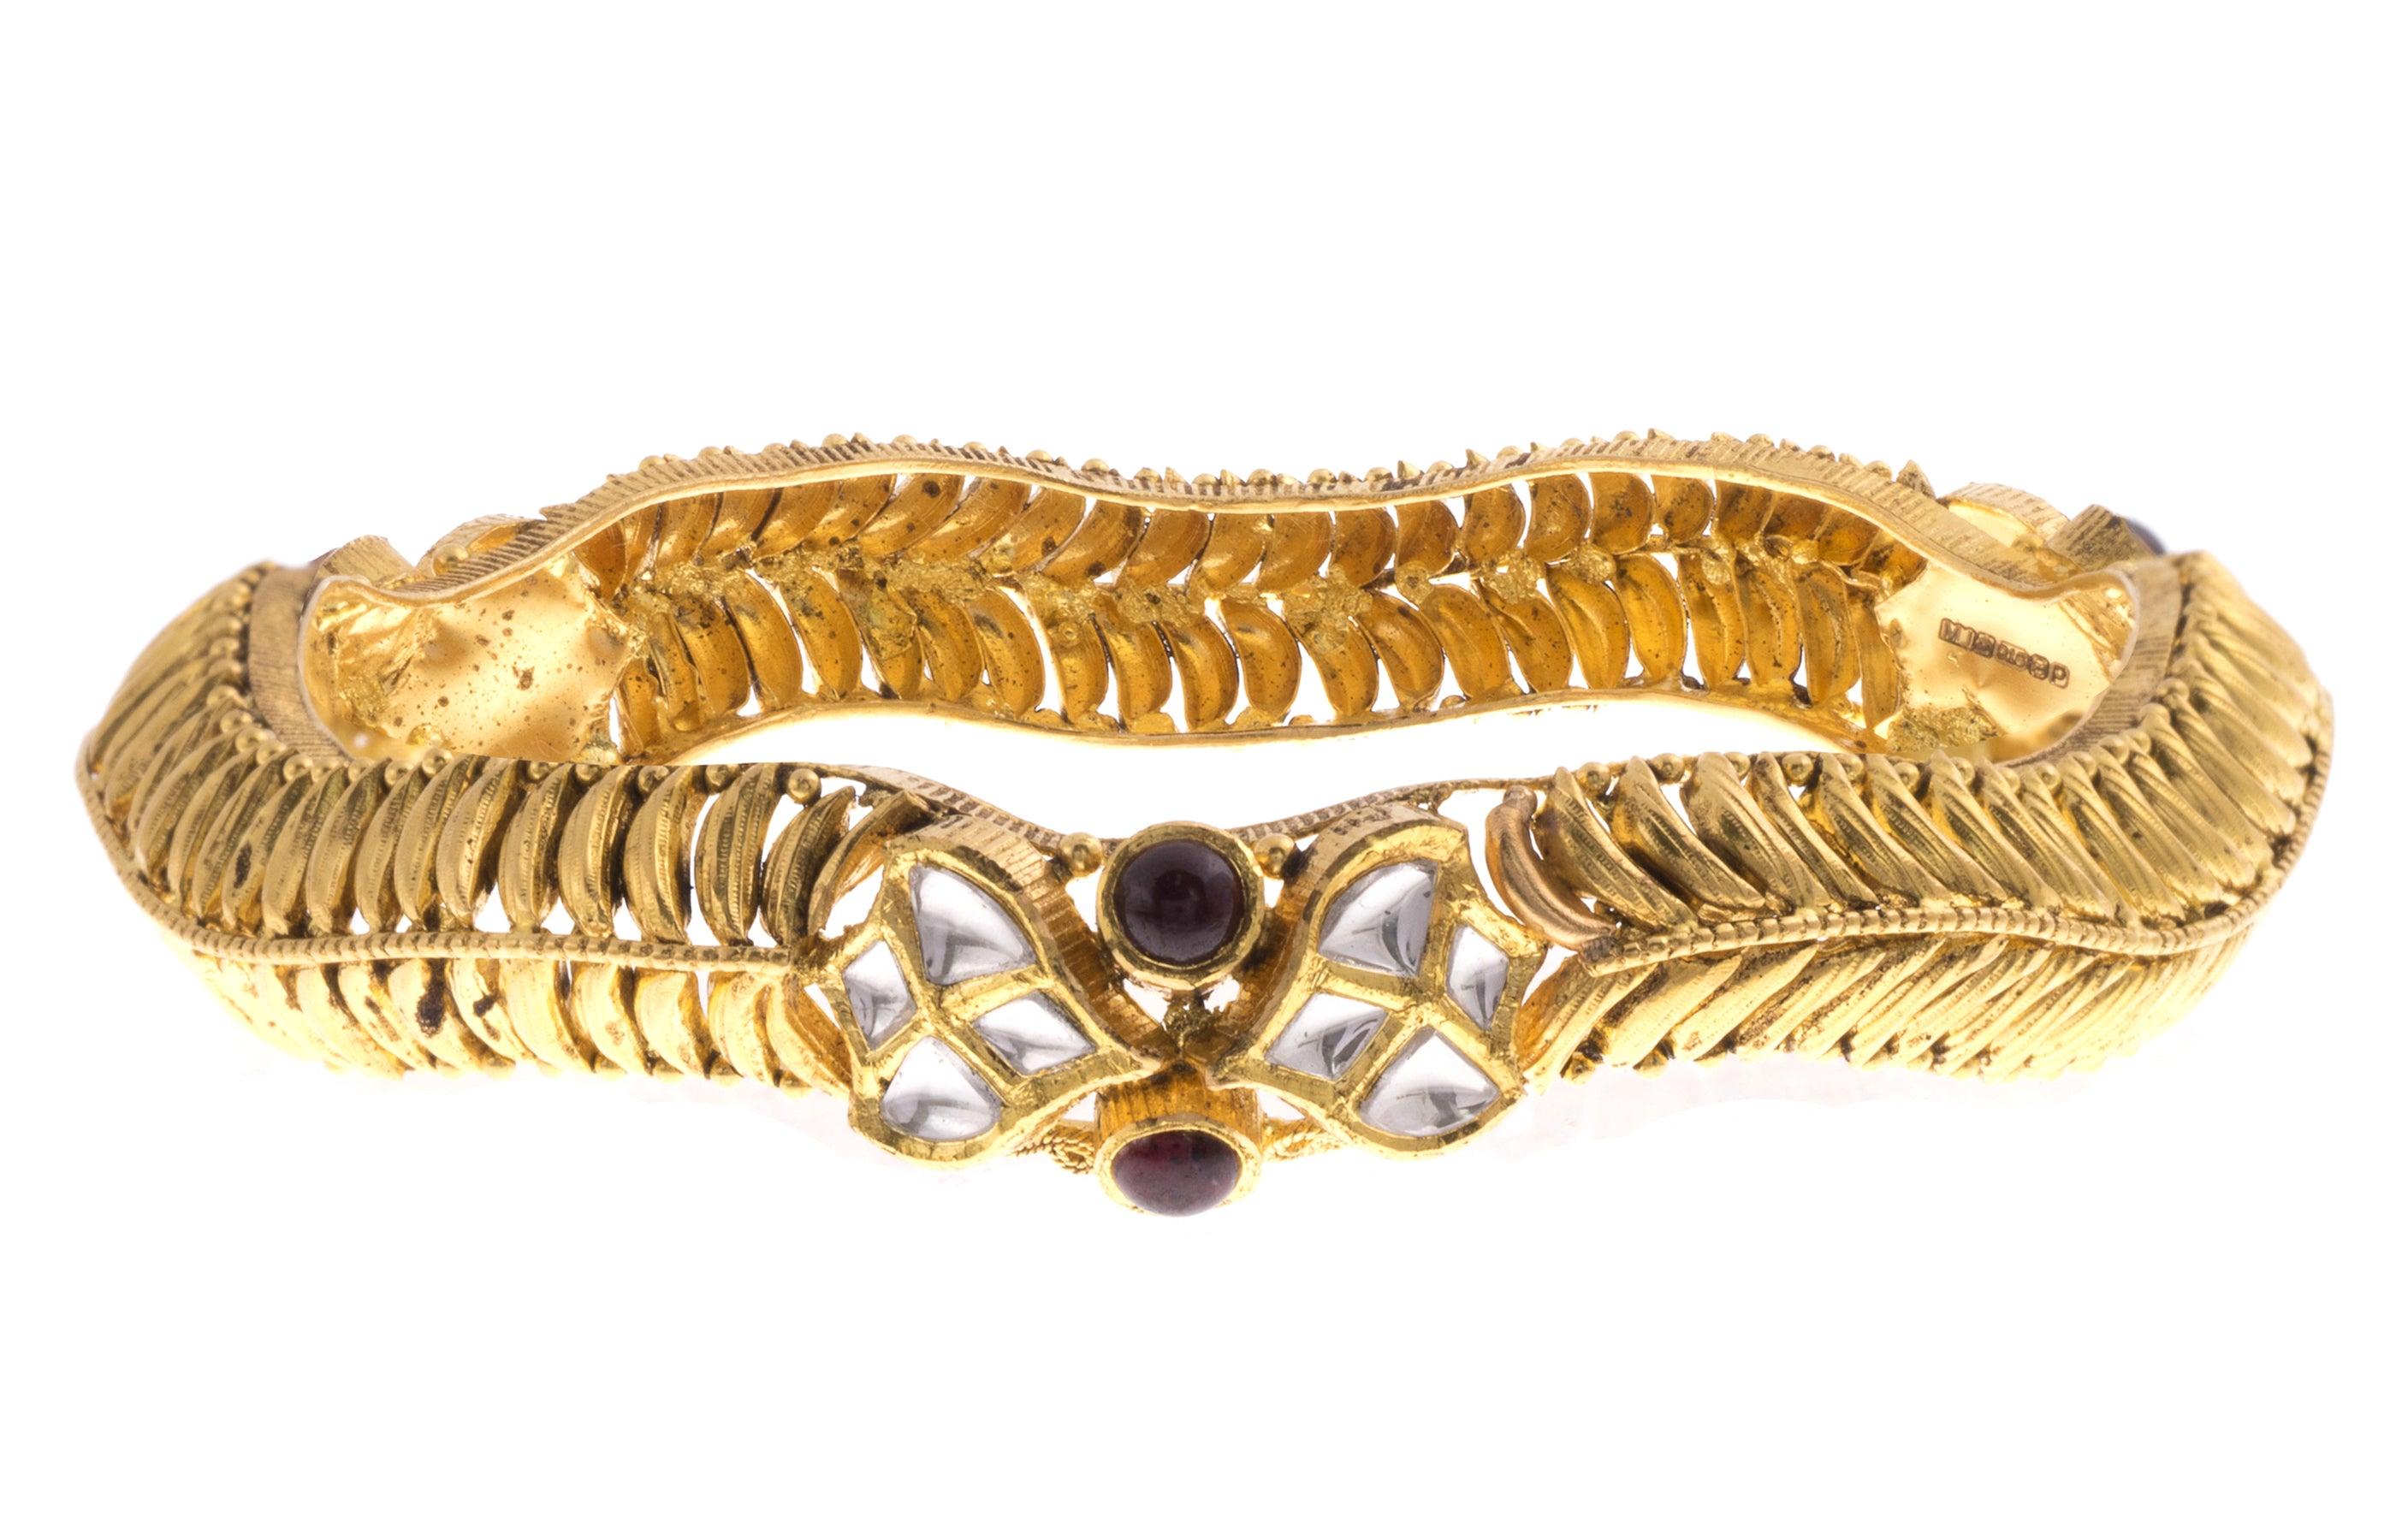 22ct Yellow Gold Antiquated Look Bangle with Synthetic Stones B-1582 - Minar Jewellers